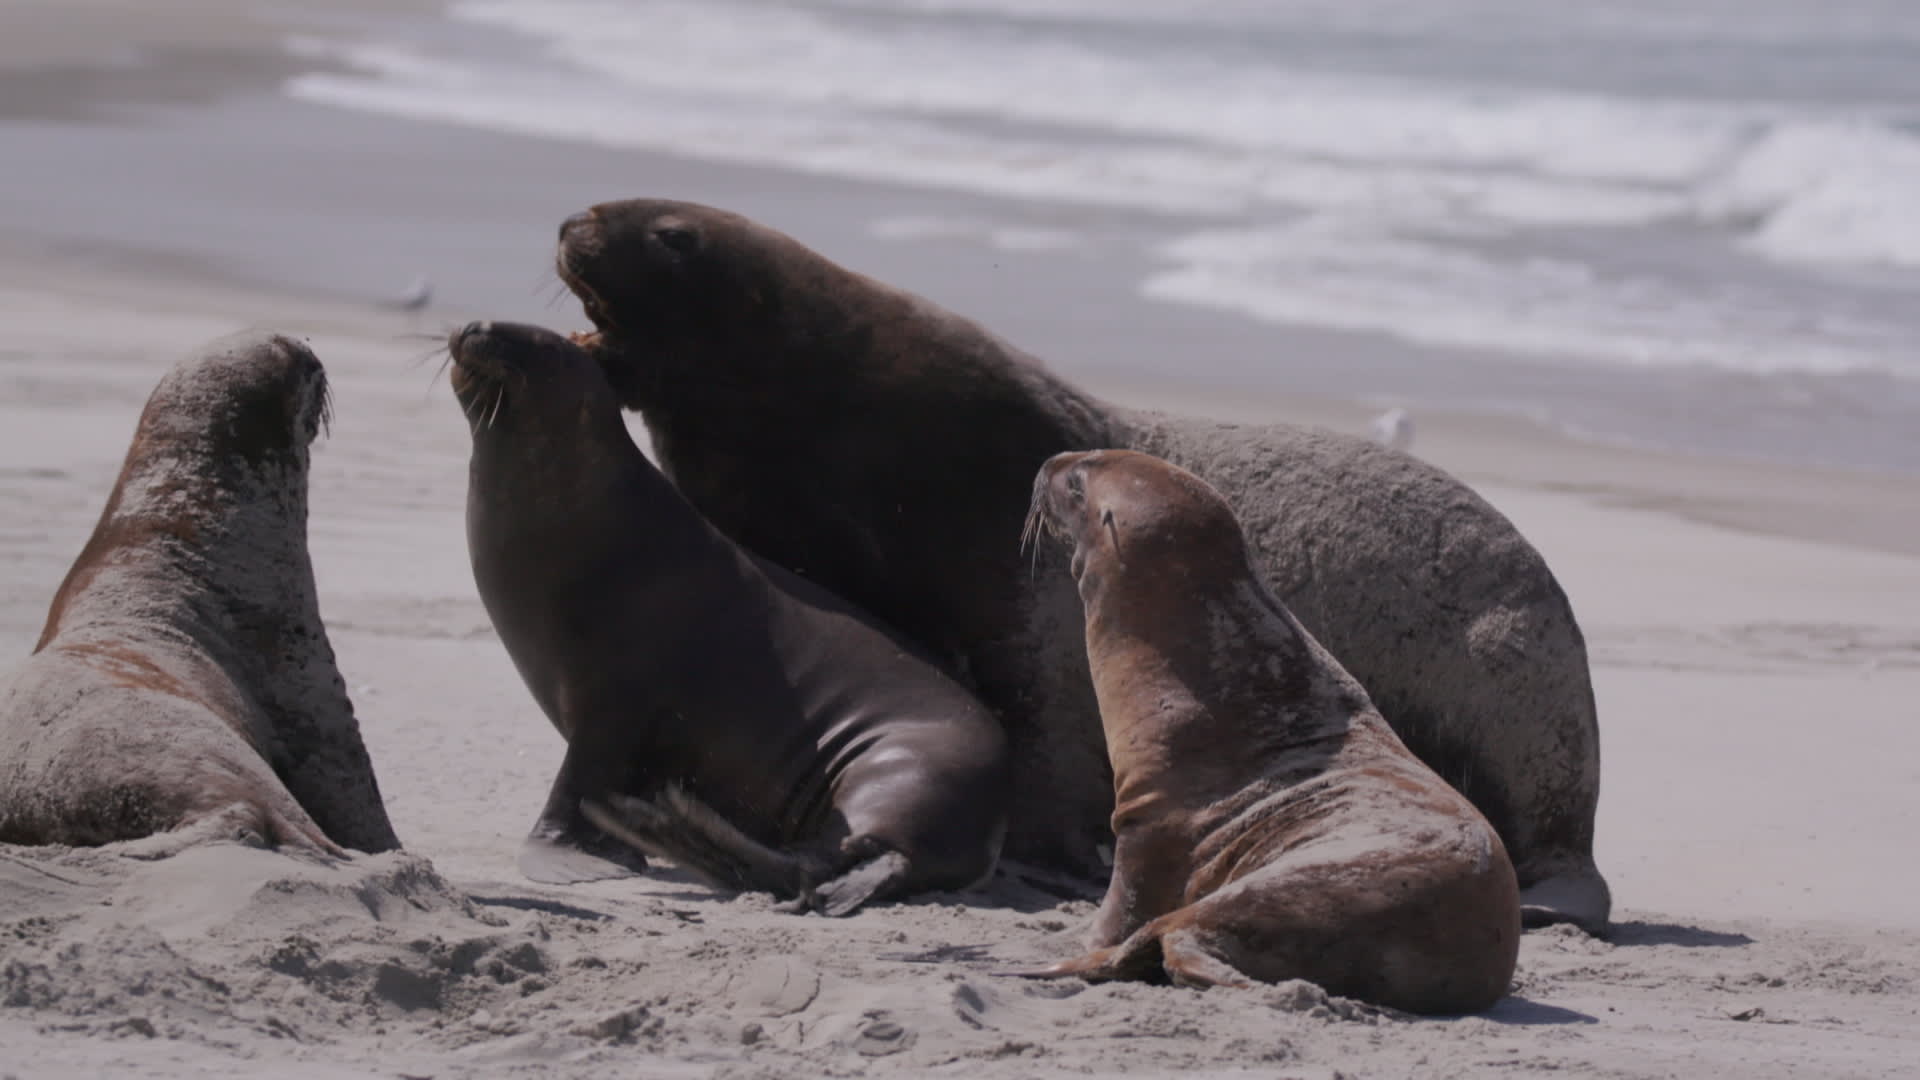 In New Zealand, endangered sea lions